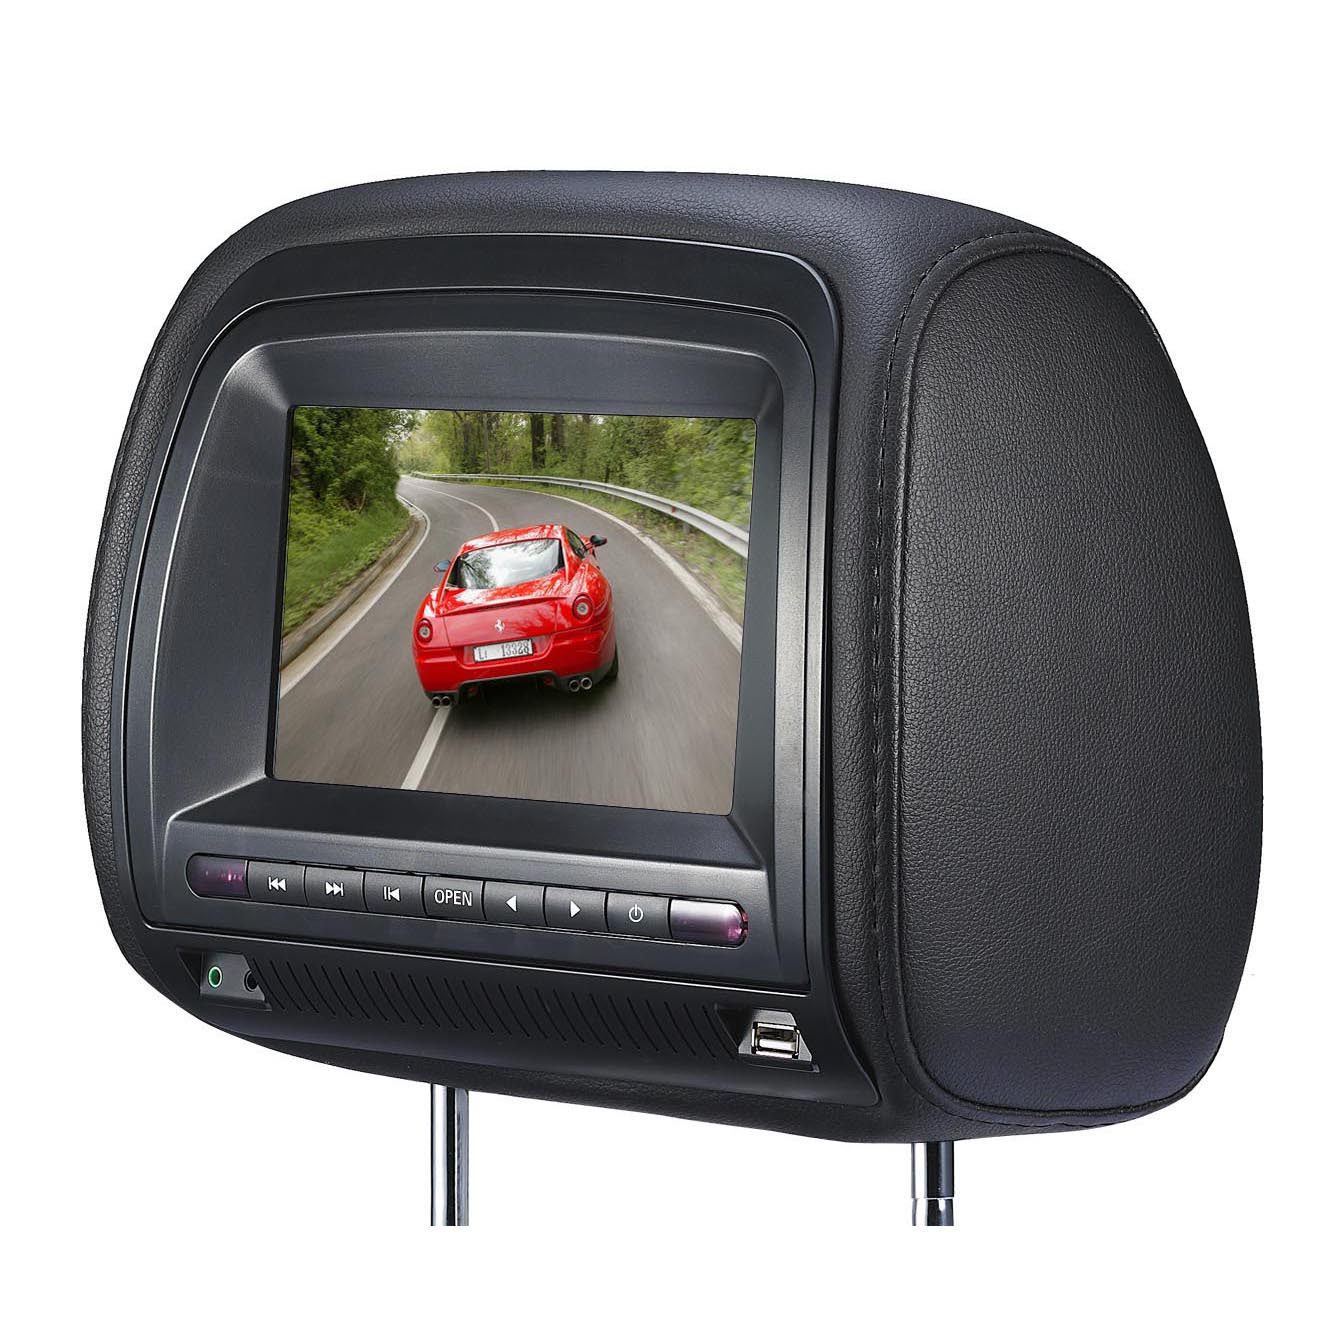 Do you have any idea on in-dash DVD player installation?